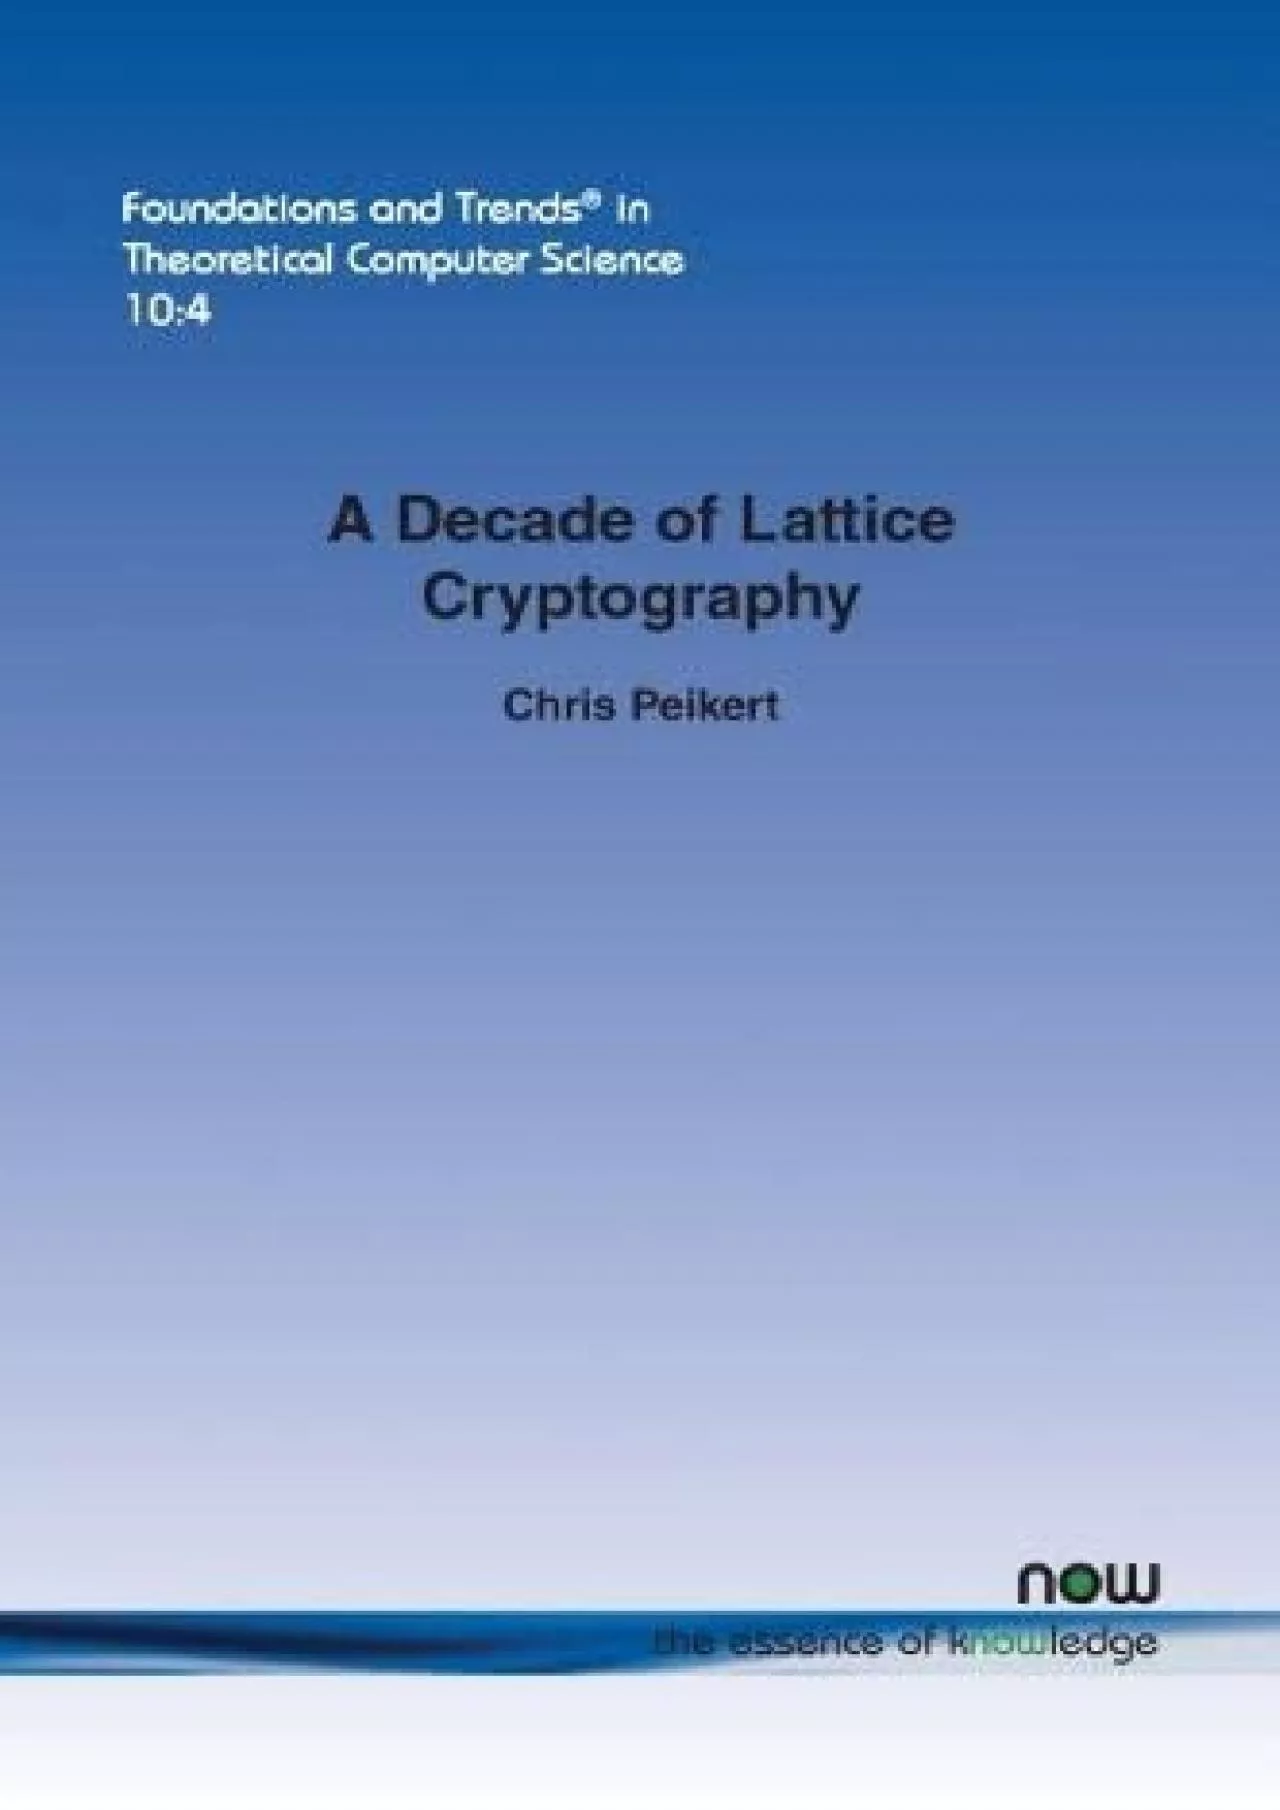 (DOWNLOAD)-A Decade of Lattice Cryptography (Foundations and Trends(r) in Theoretical